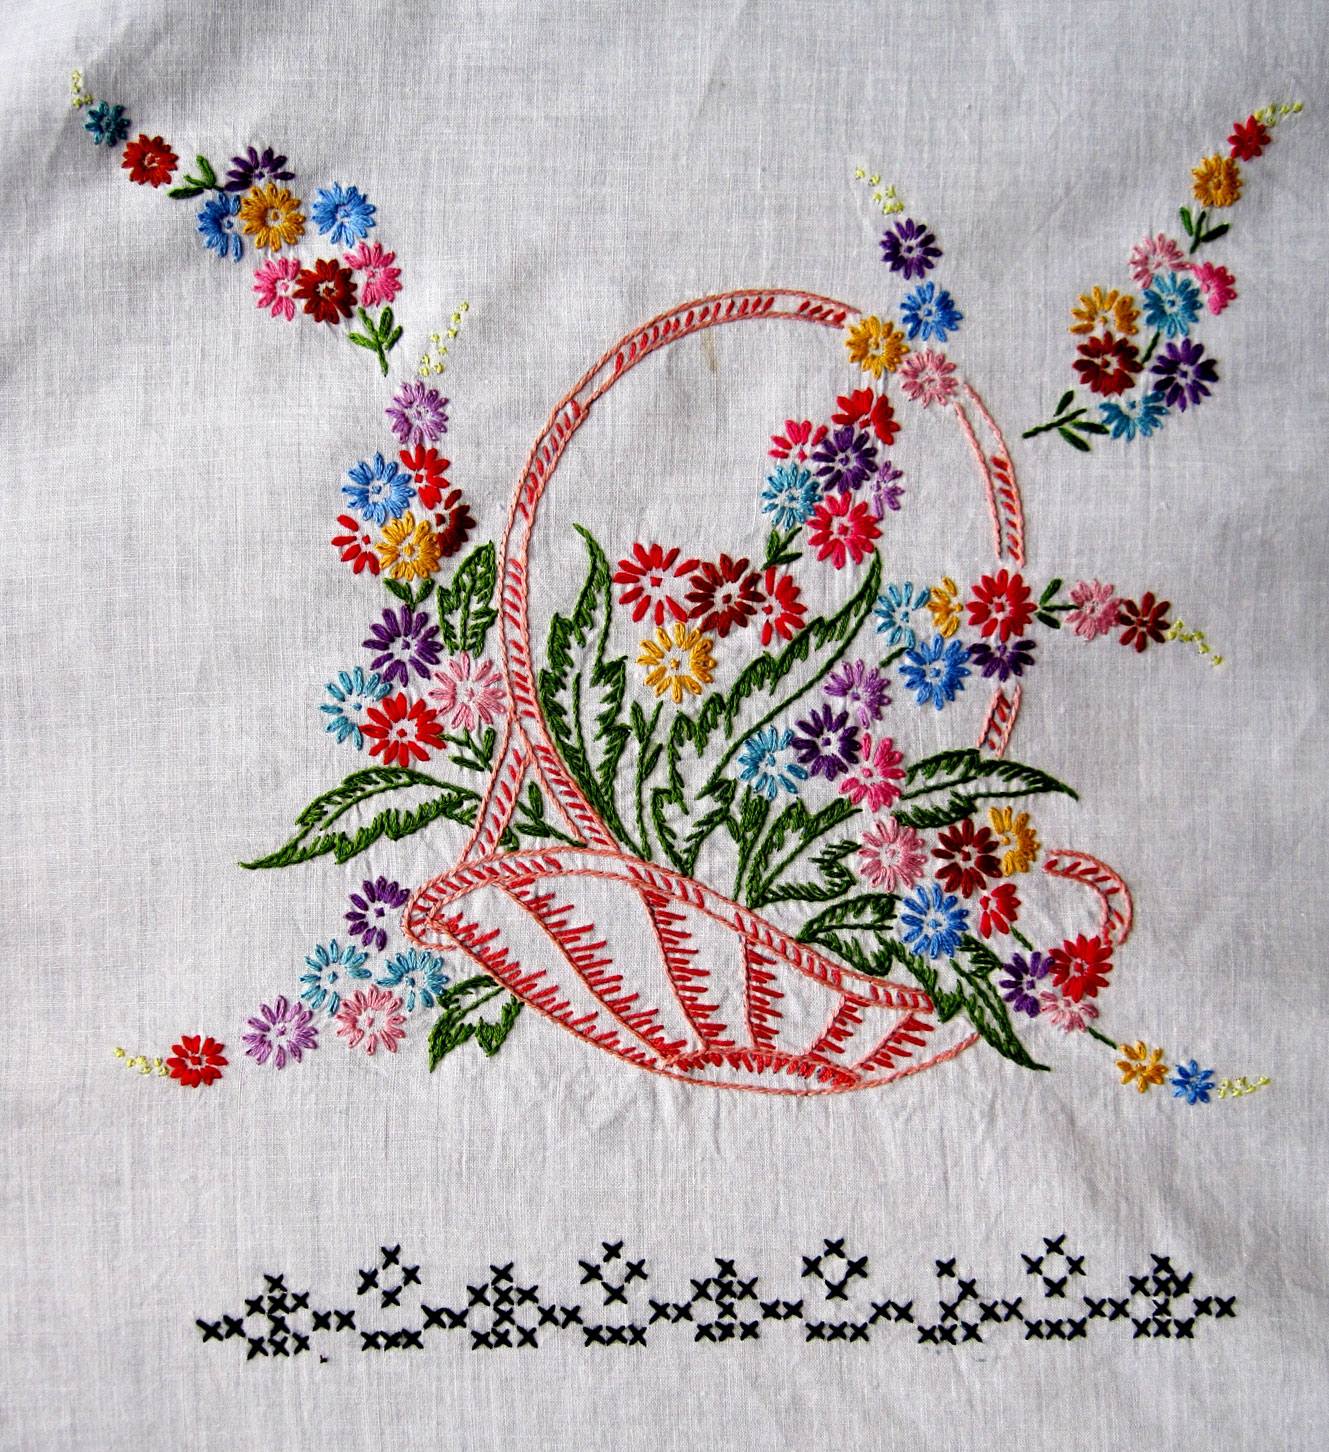 Hand Embroidery Patterns For Quilts Patchwork Embroideryfabric Patchwork Hand Embroidery Quilted Handbags